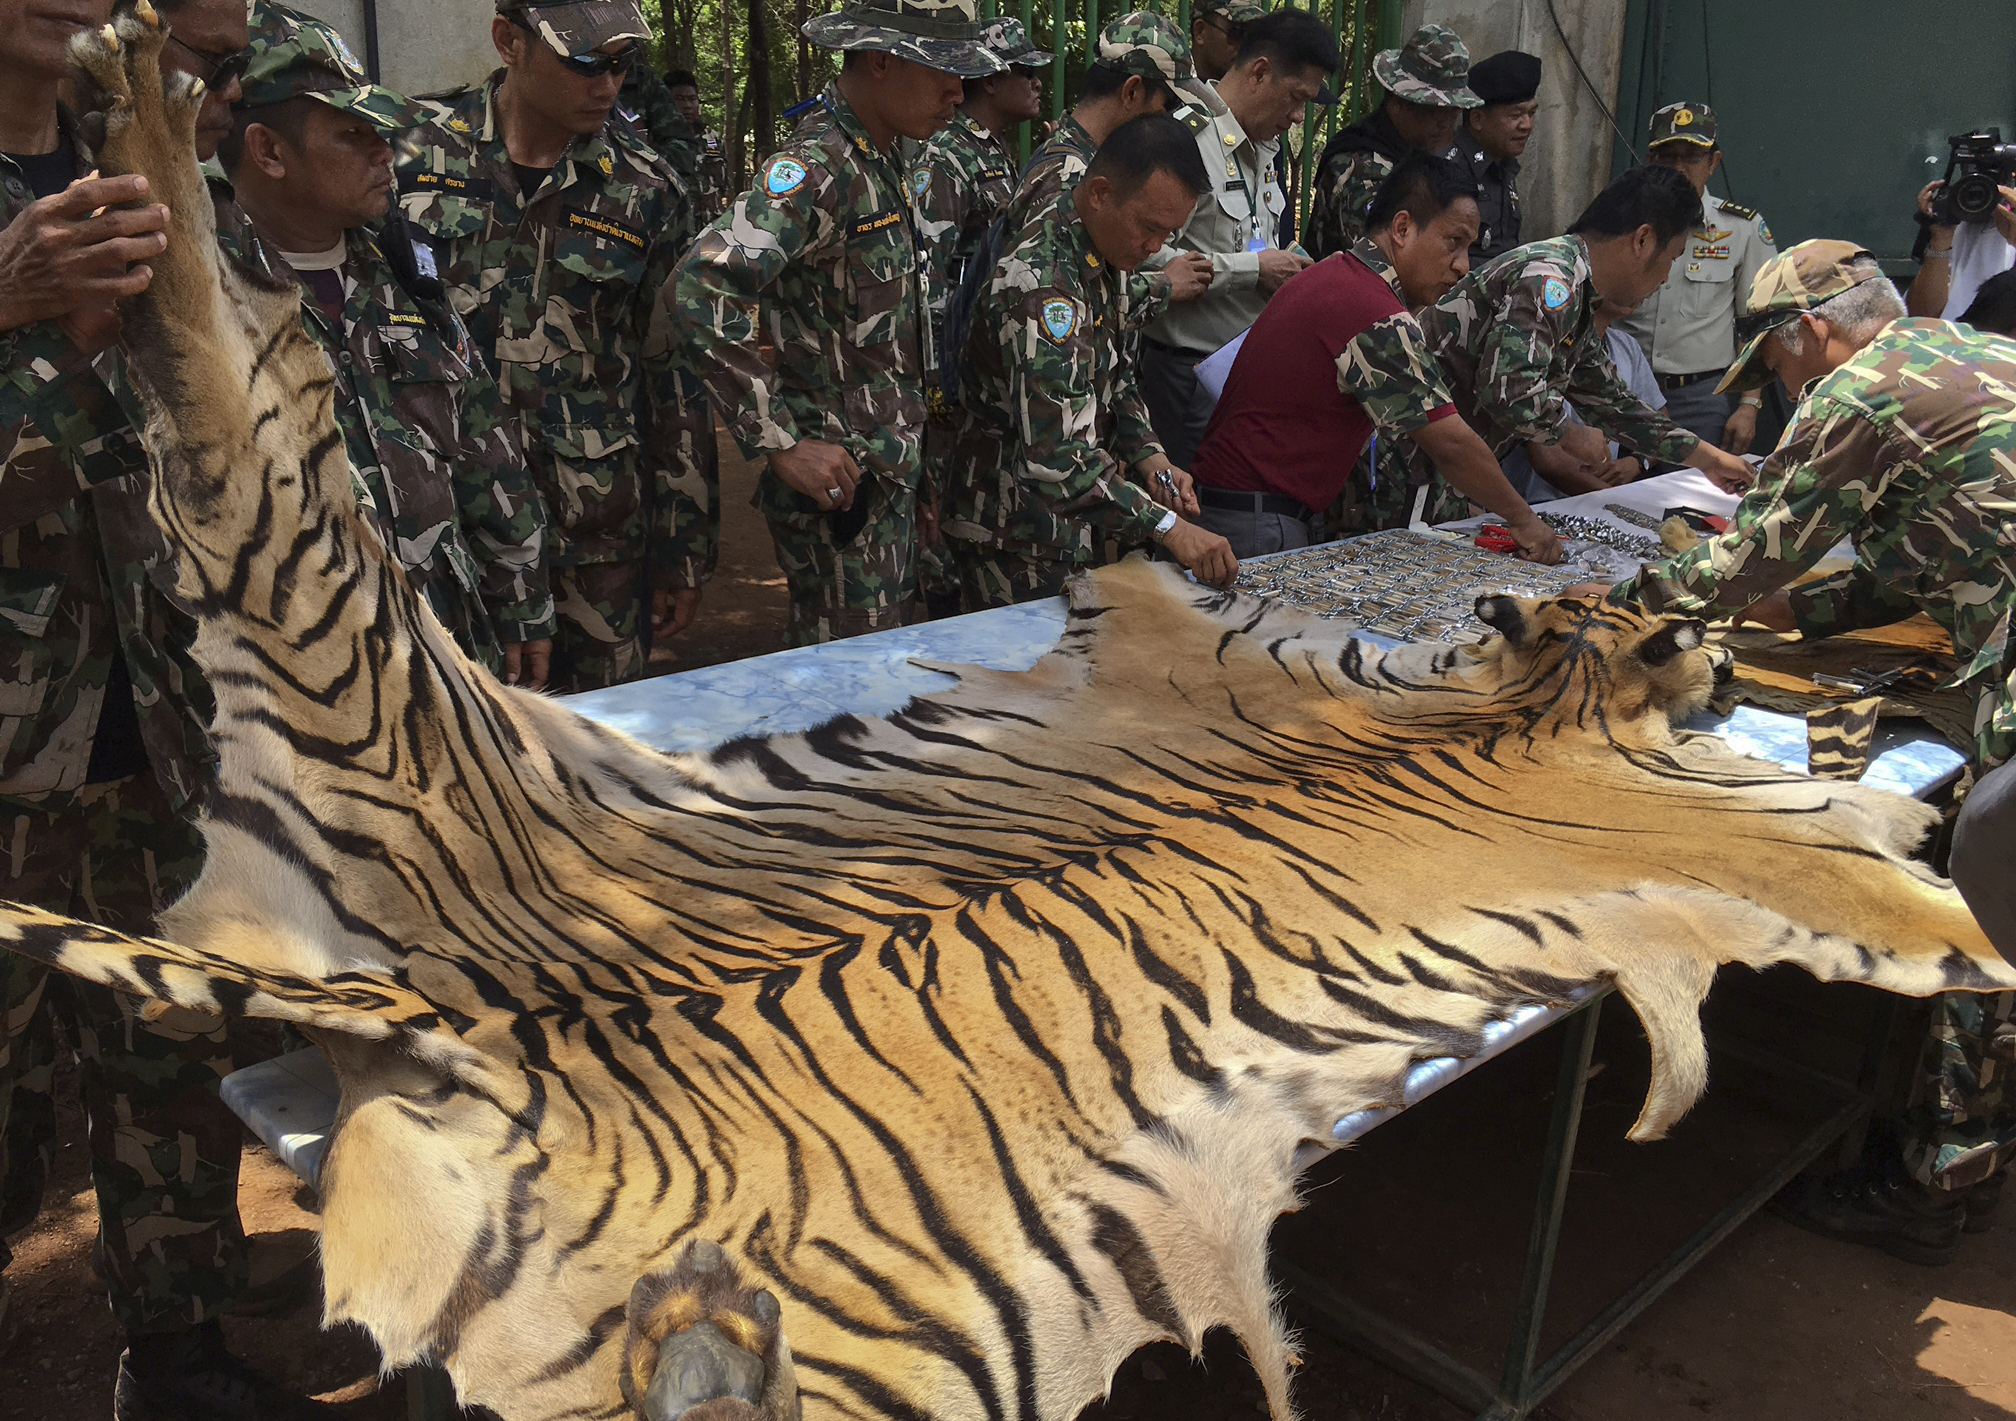 National Parks and Wildlife officers examine the skin of a tiger at the 